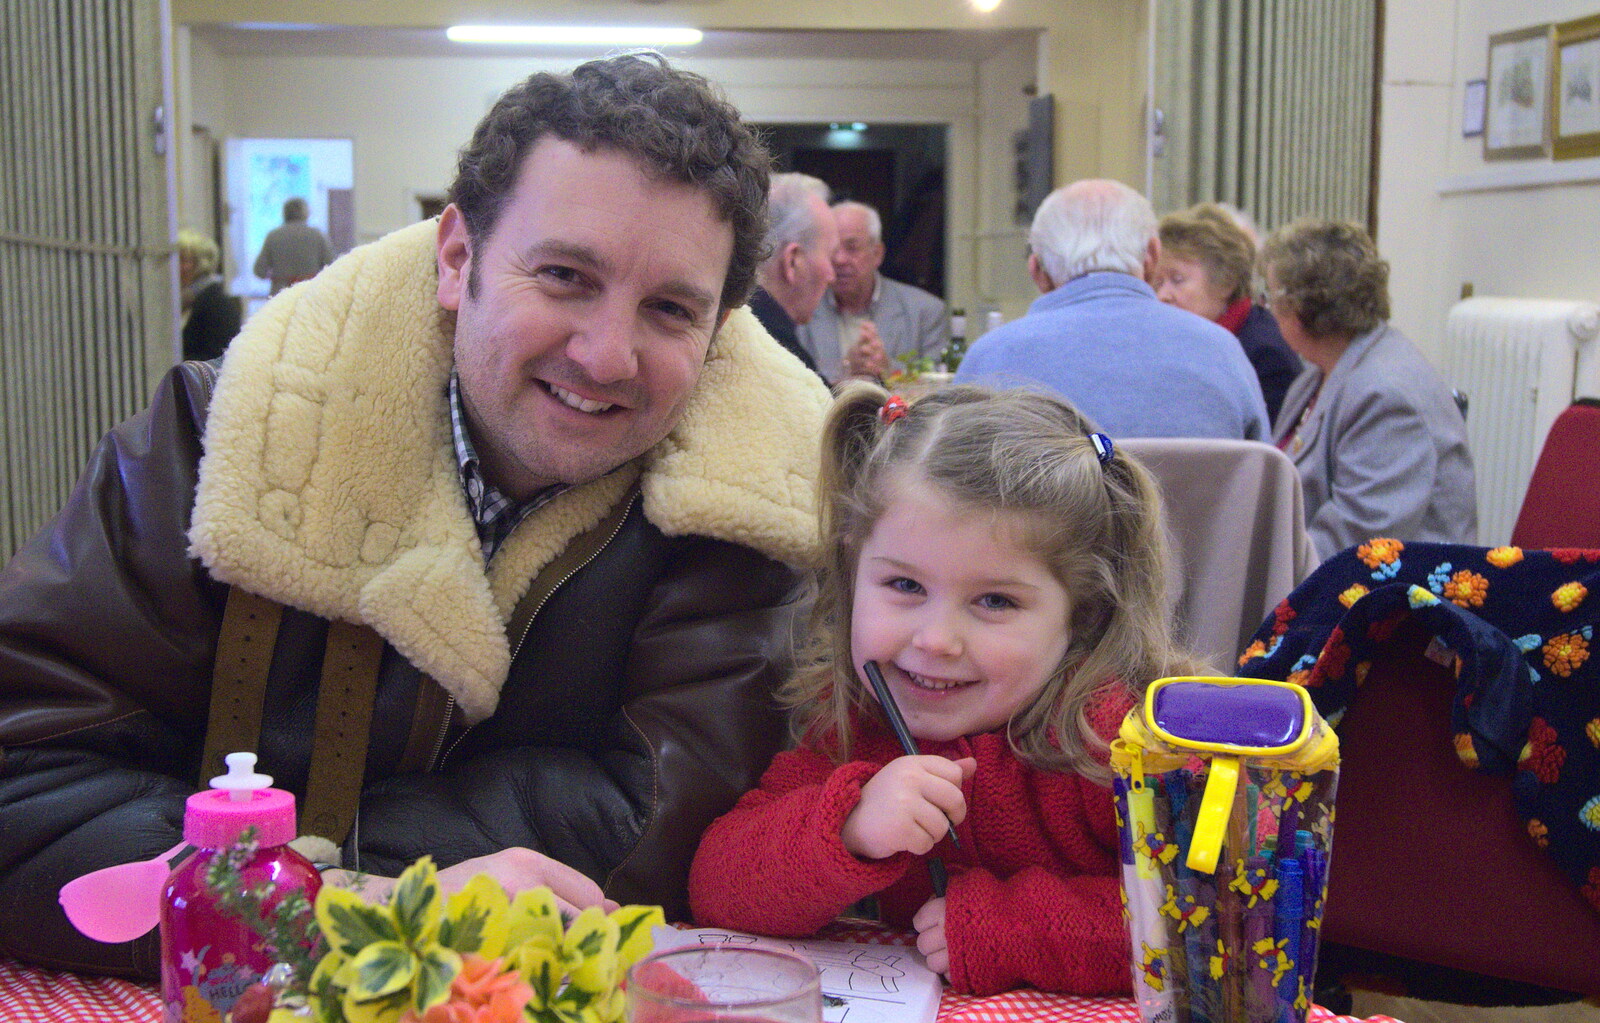 Clive and Amelia from Sunday Lunch at the Village Hall, Brome, Suffolk - 3rd February 2013